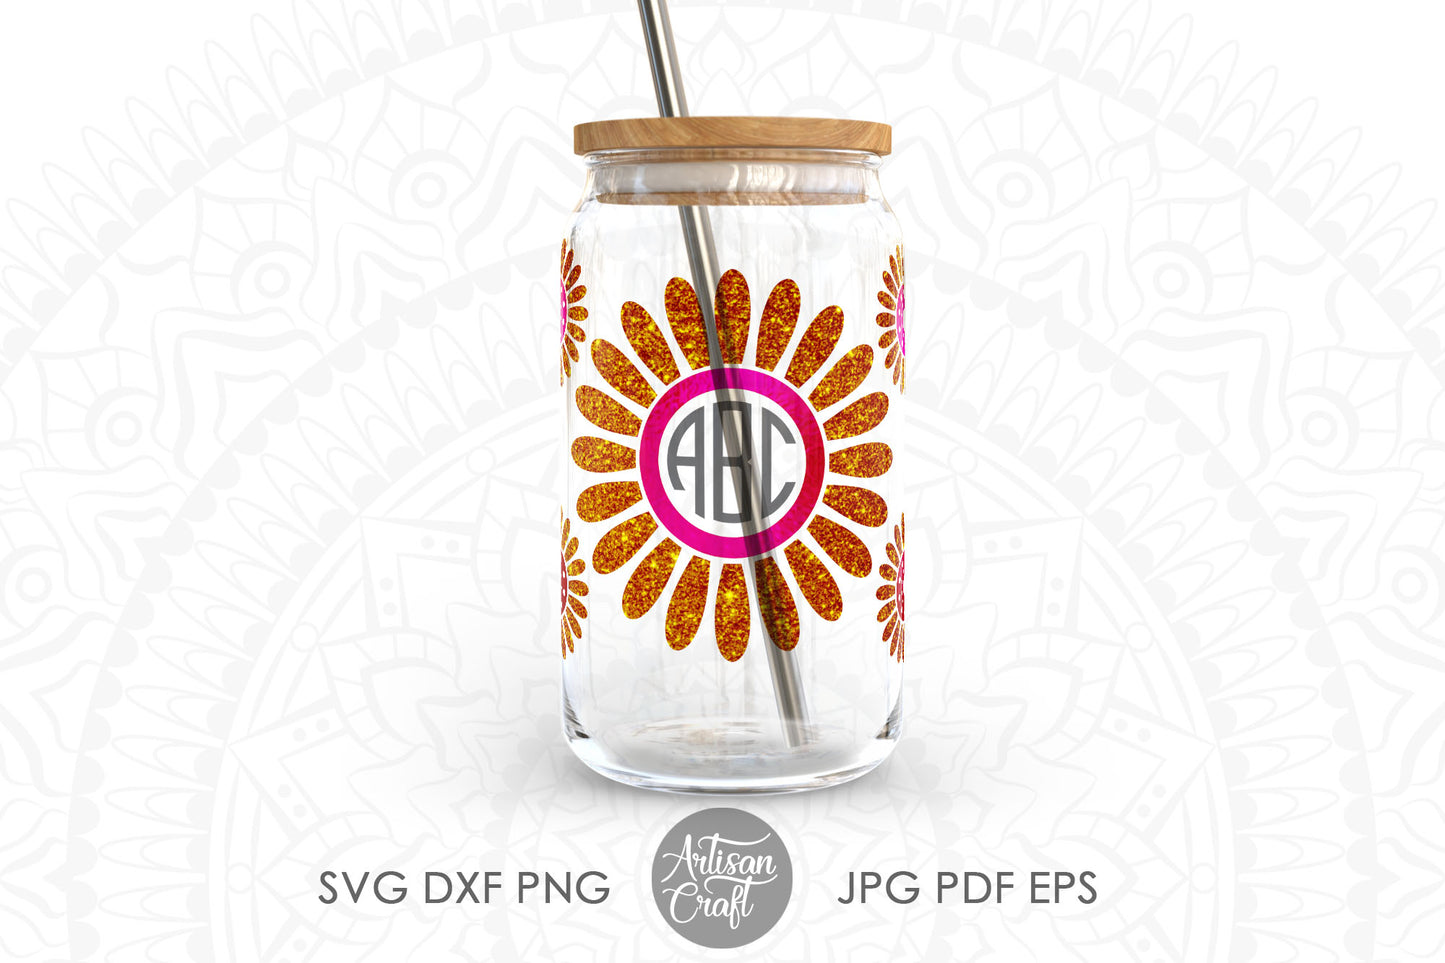 16oz glass can SVG with Sunflower monogram